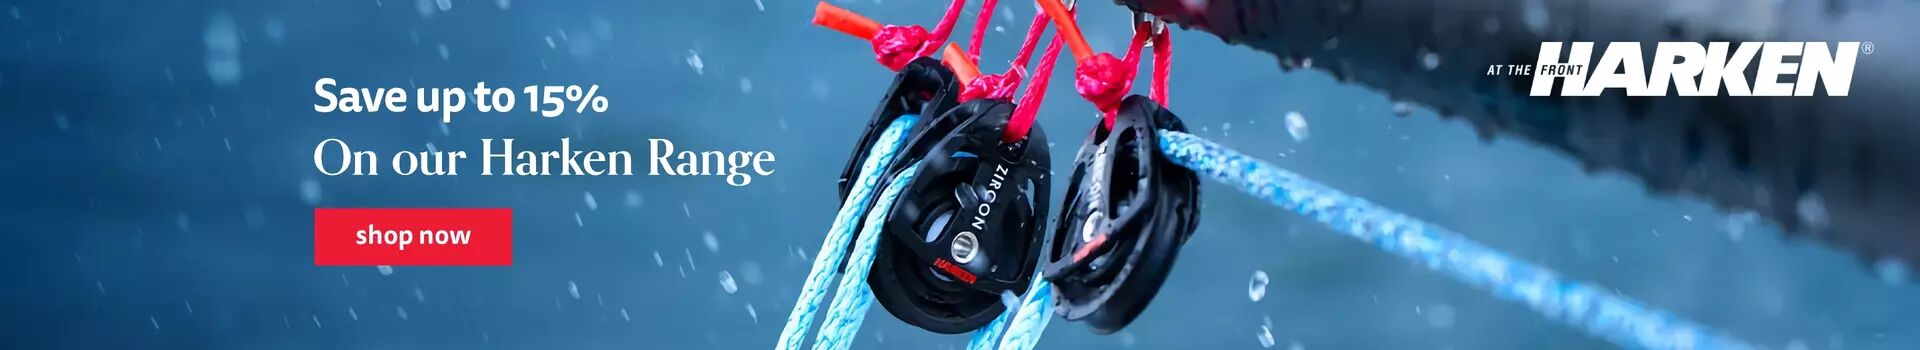 Save up to 15% On our Harken Range